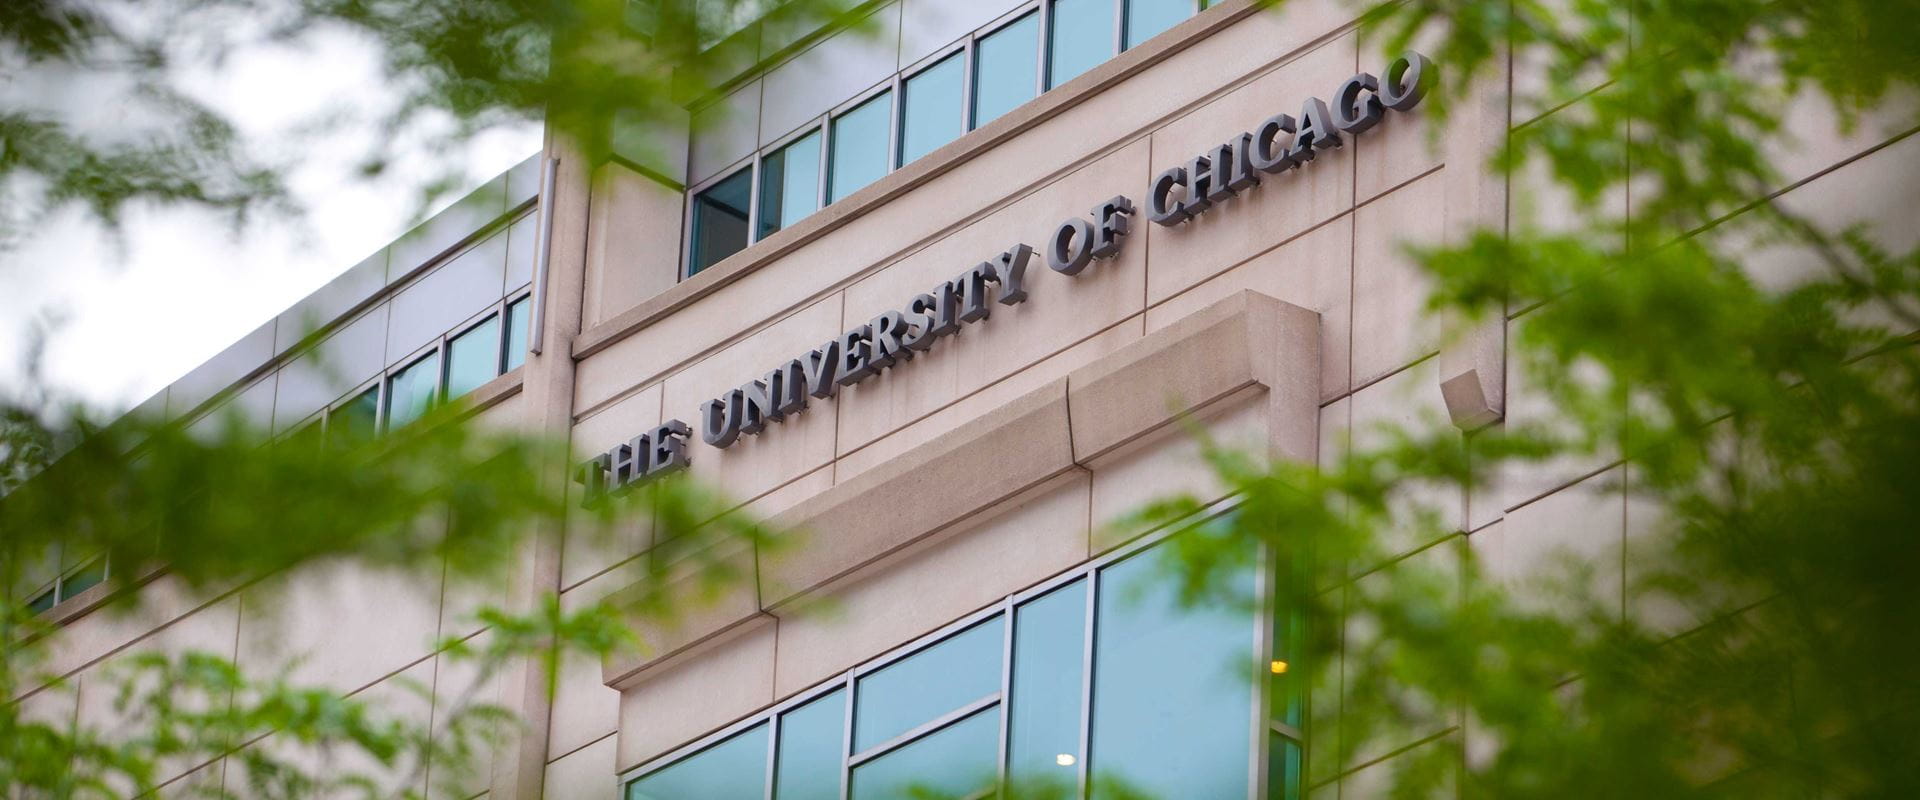 Executive MBA Program Chicago Campus The University of Chicago Booth